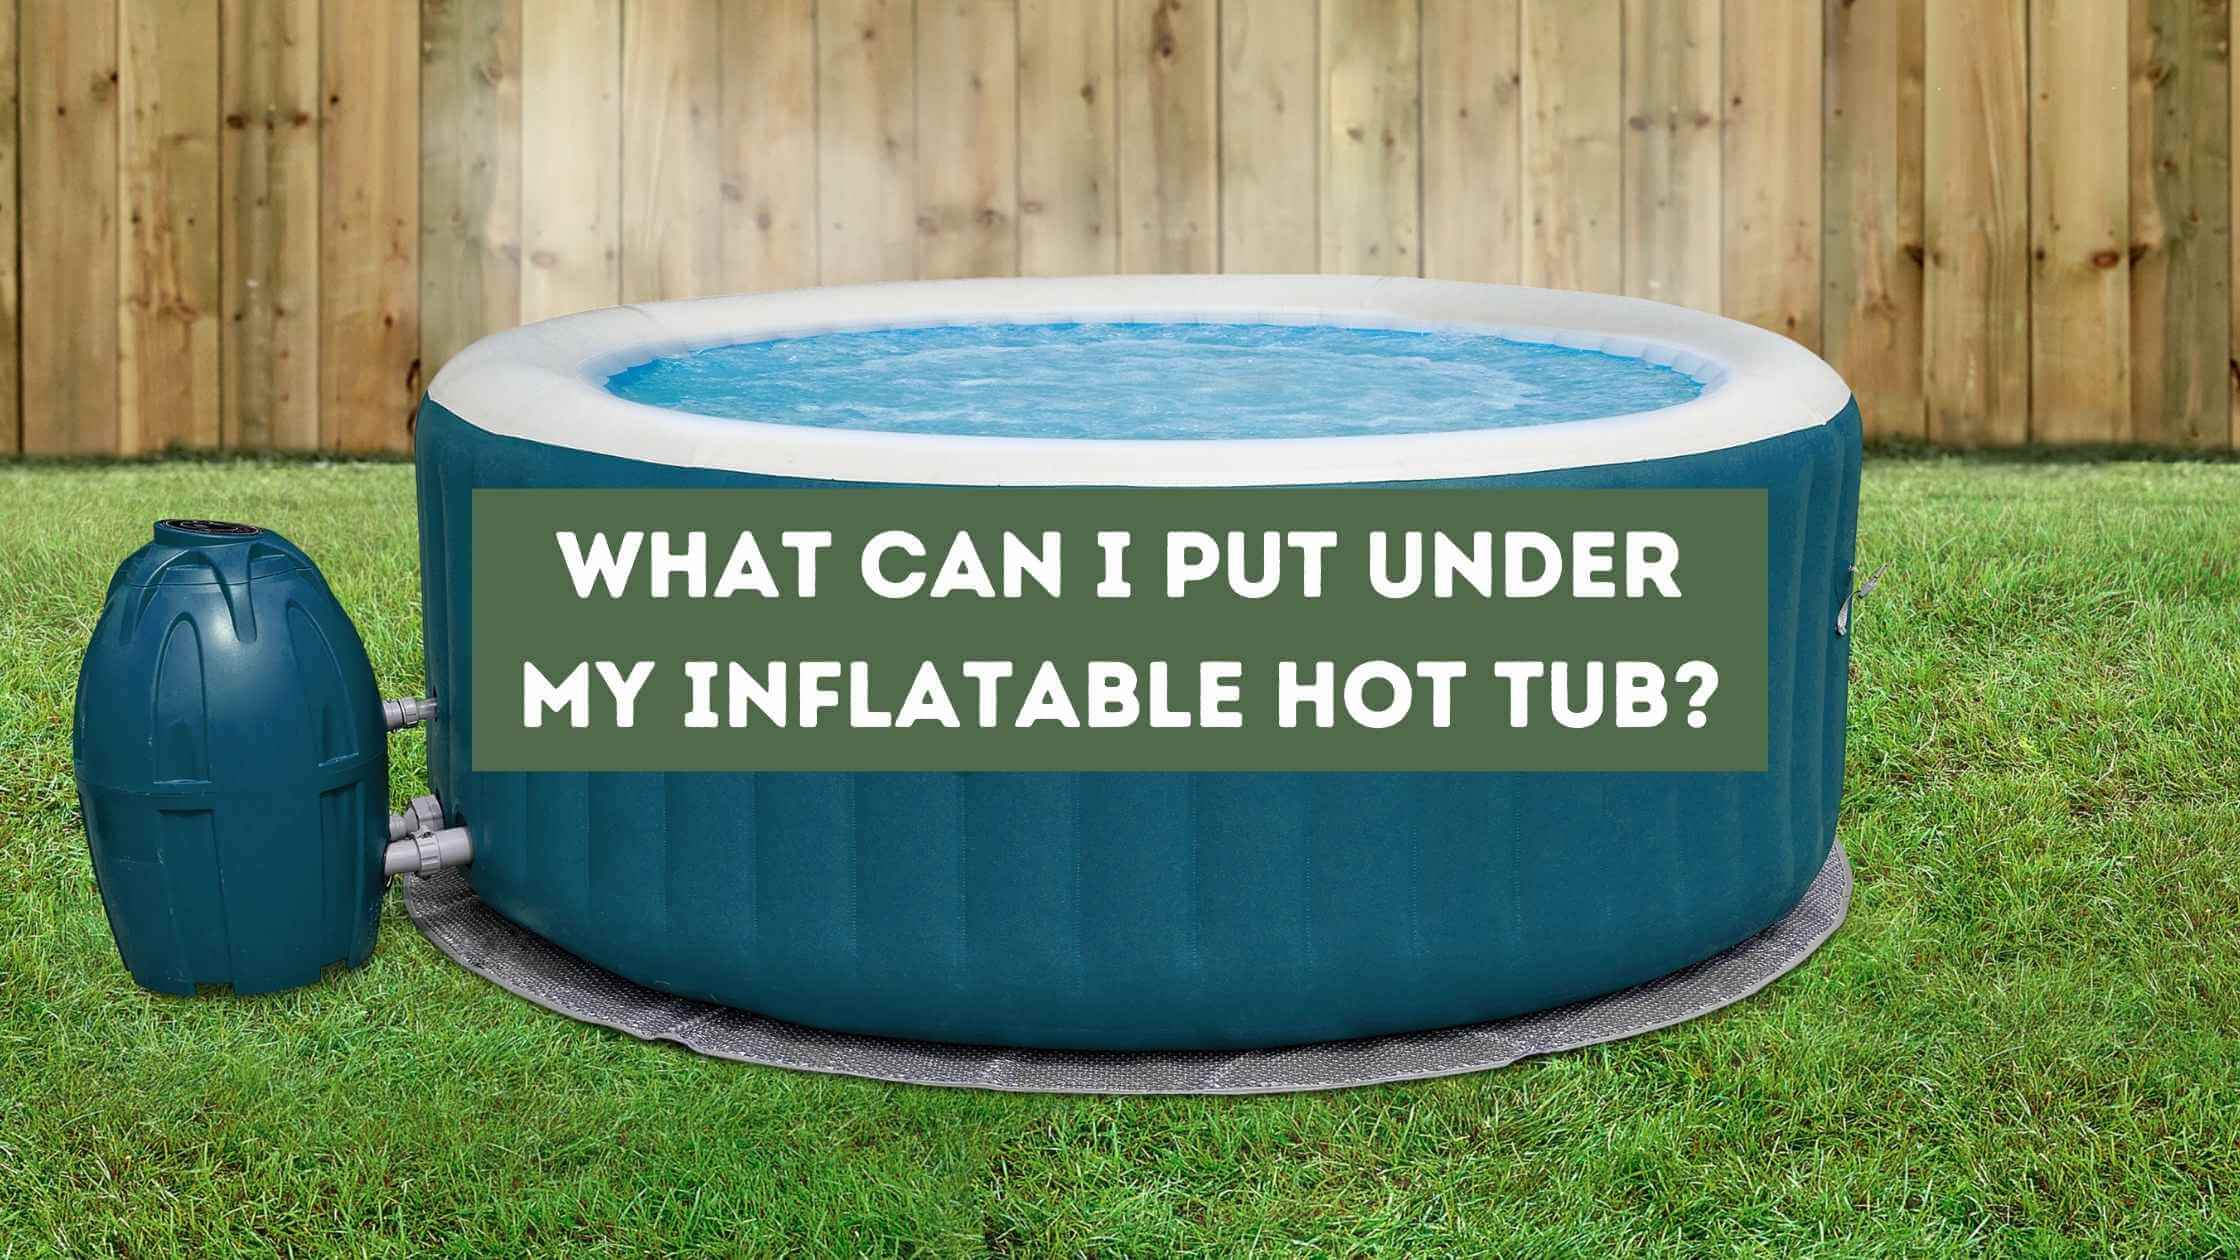 Can I Put Under My Inflatable Hot Tub